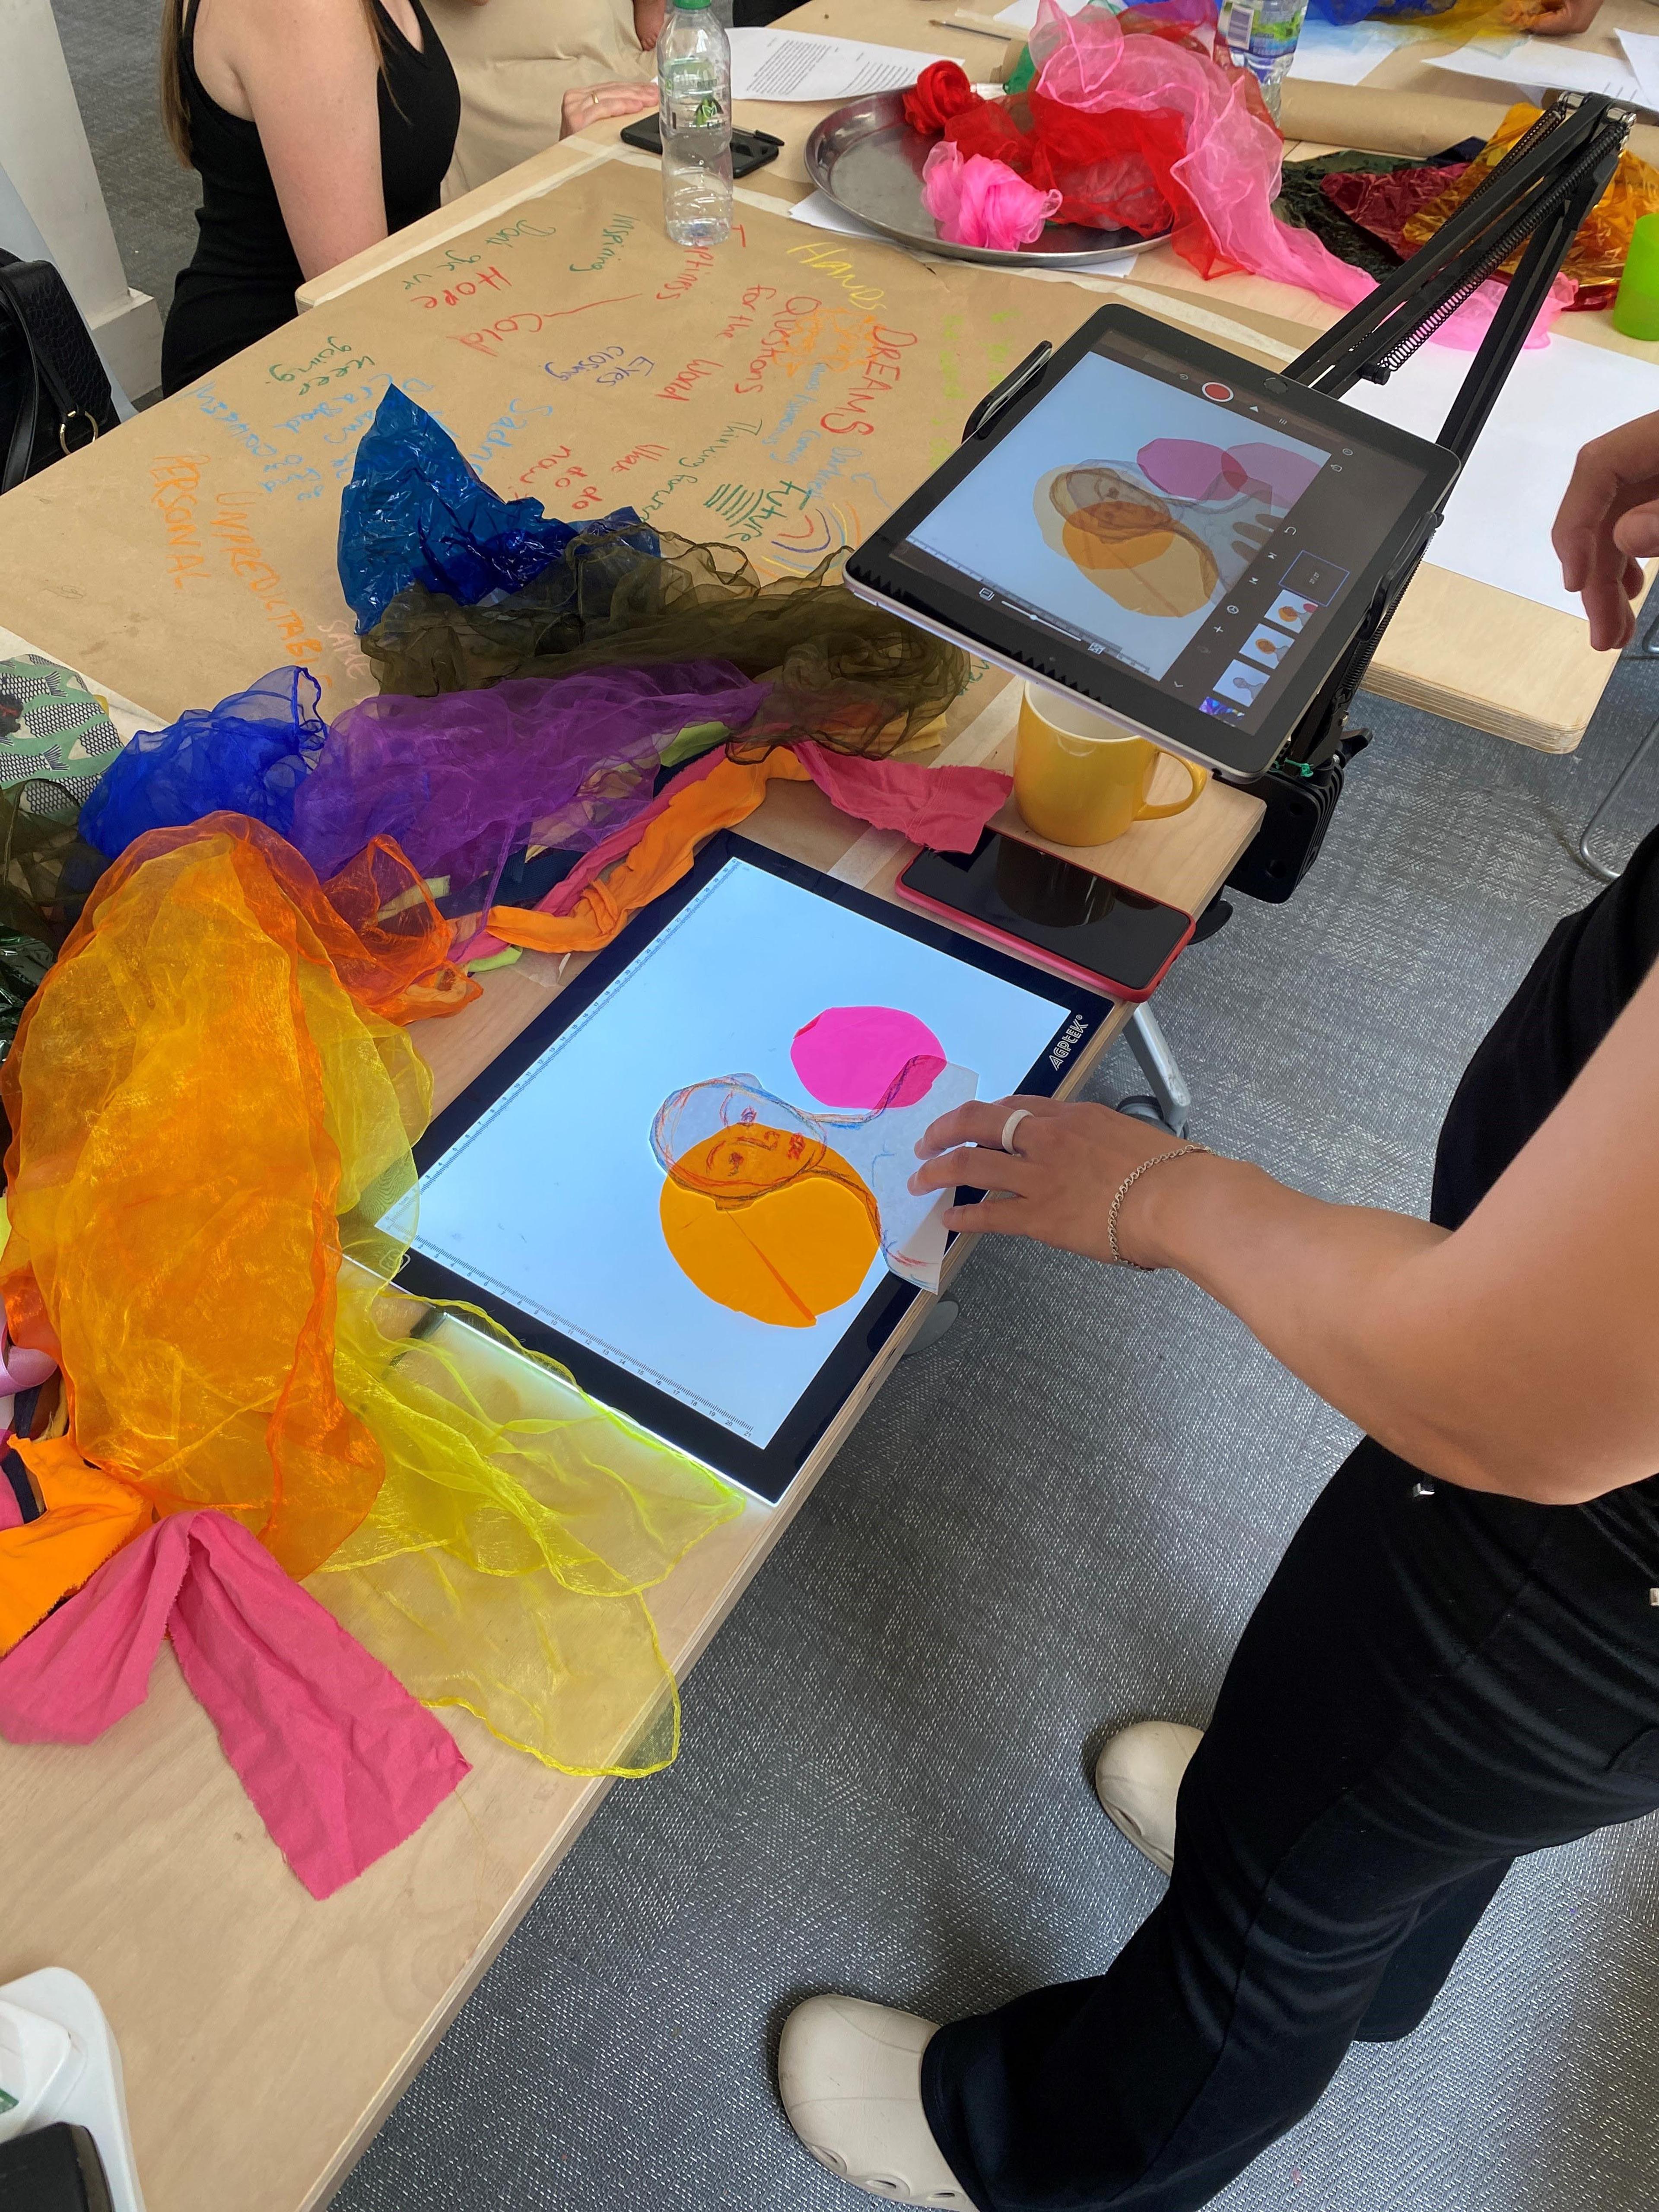 Photograph of a person creating an animation with a digital tablet on a stand, using sheets of fabric and a drawing of a person. On the table there is a pile of fabric and someone in the background also sitting at the table.